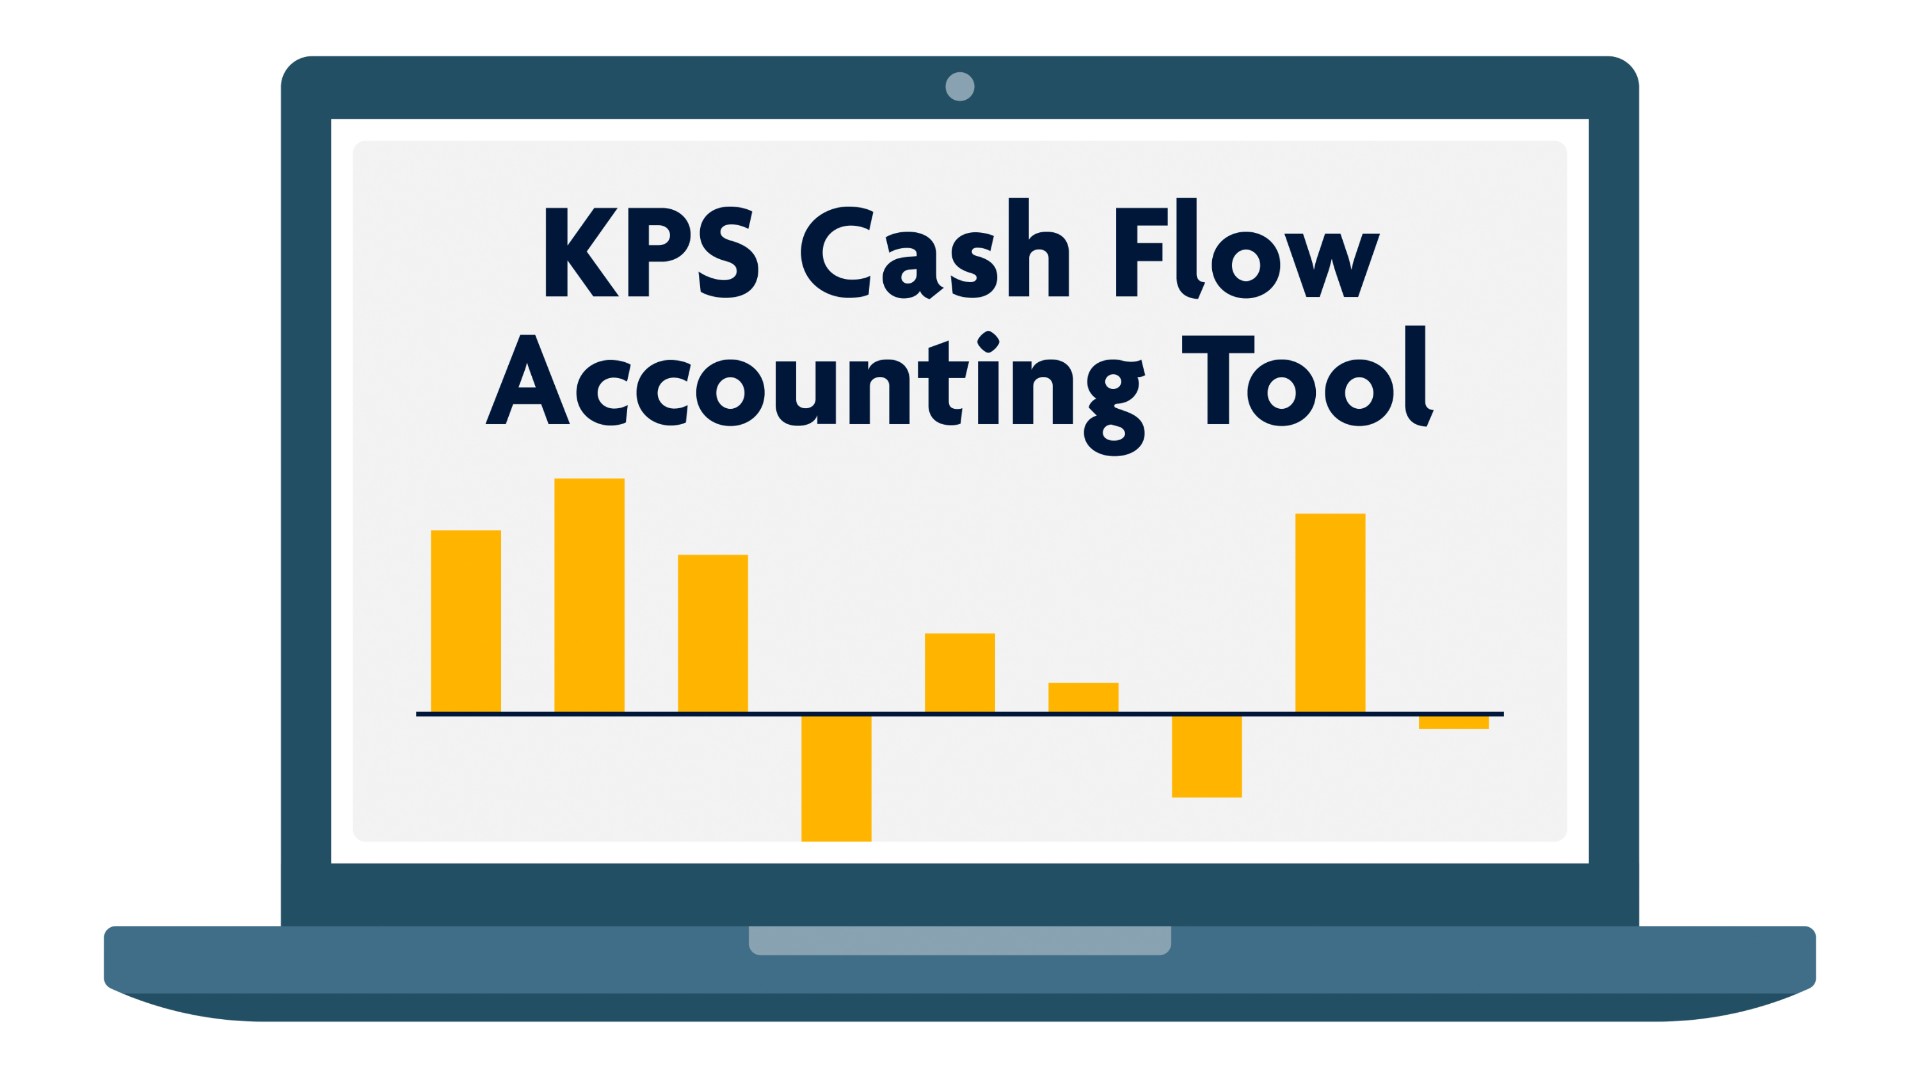 KPS Cash Flow Accounting Tool